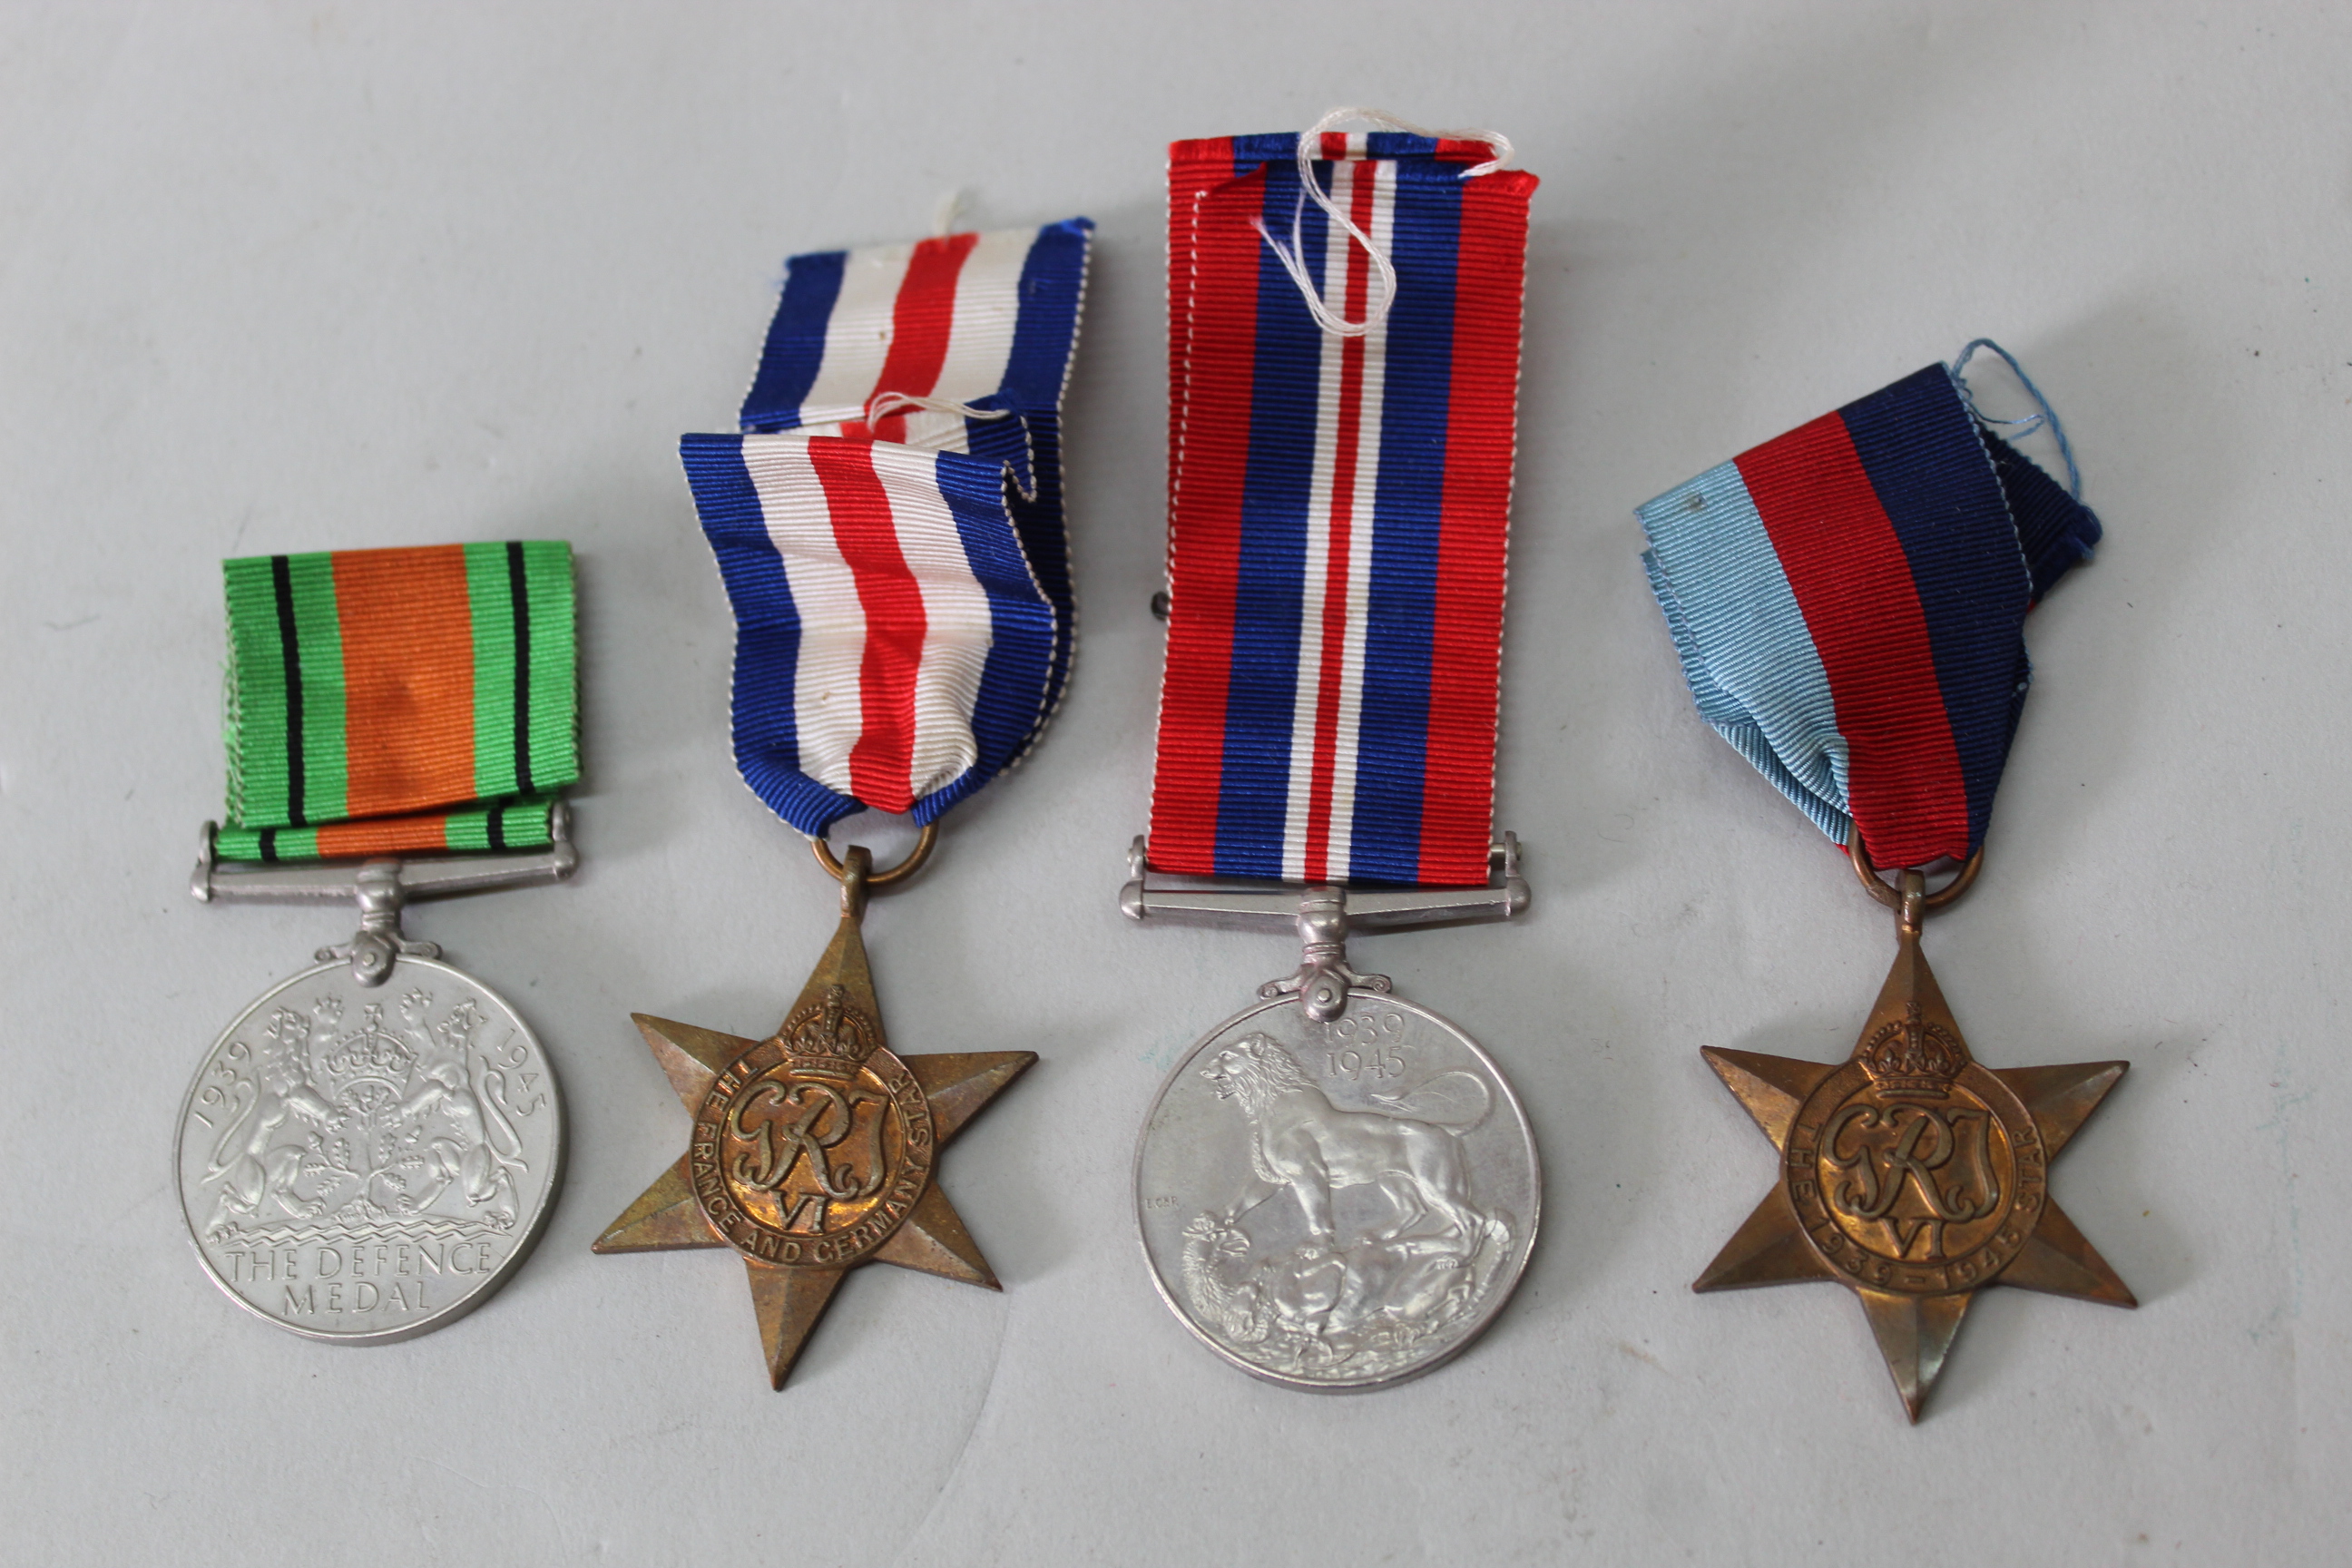 A WWII group of four medals in original box of issue, France and Germany Star 39/45, - Image 2 of 3